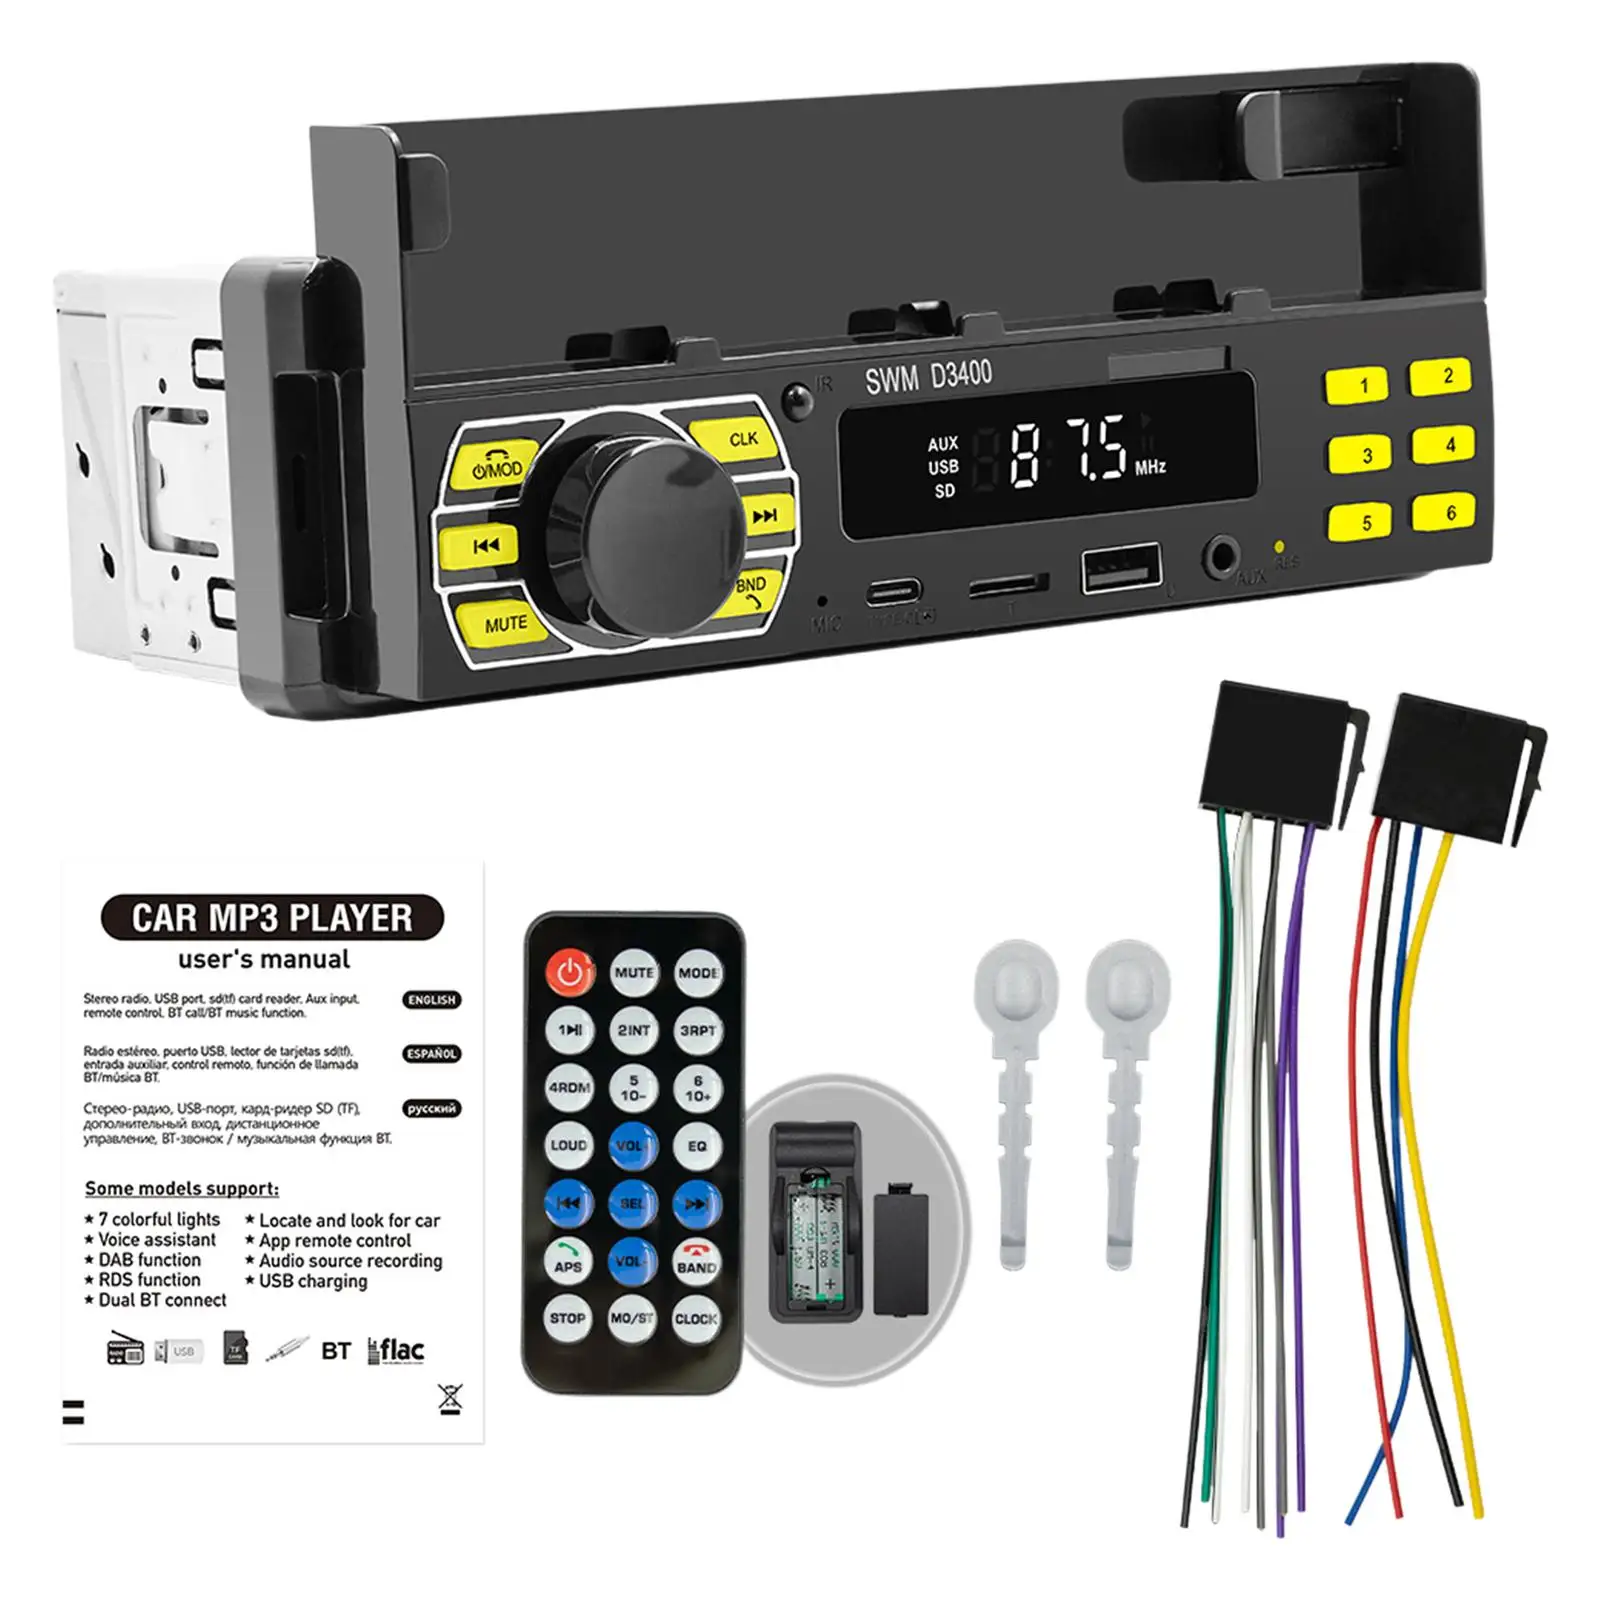 Car Radio AUX in LED Display Handsfree Call FM Audio 7 Color Button Type TF Card Multimedia Player for Cars Trucks